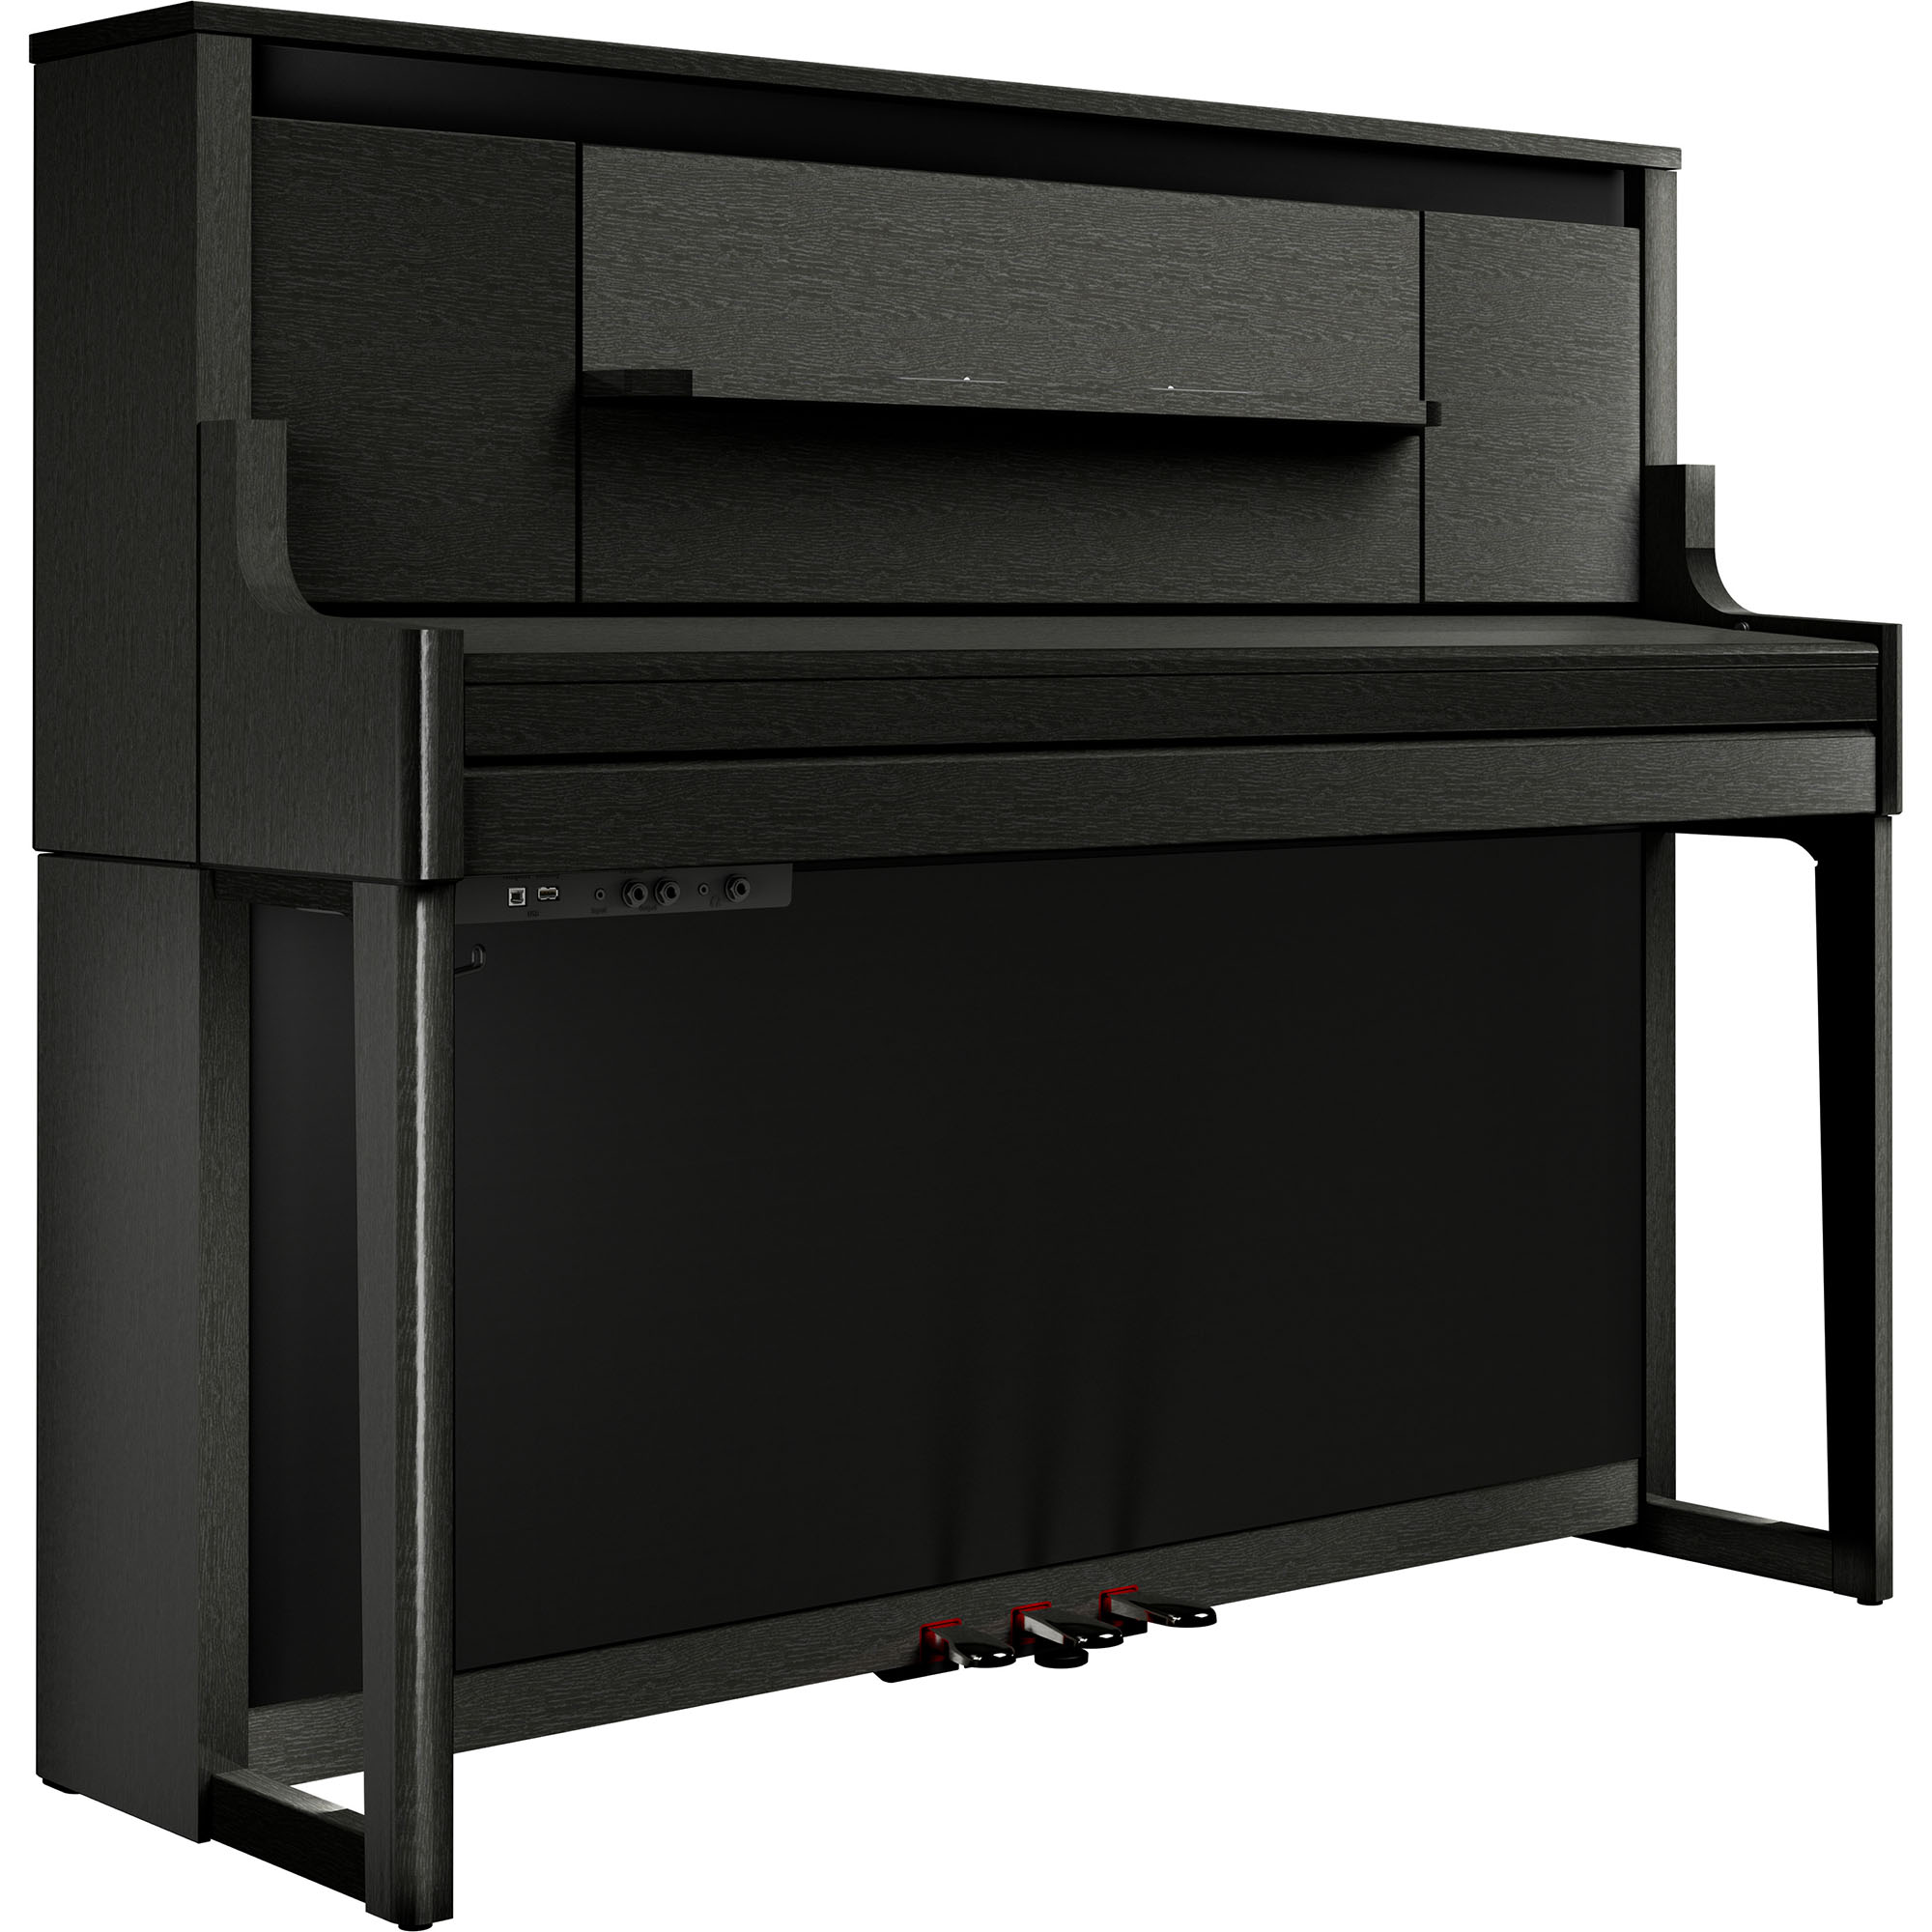 Roland Lx-9-ch - Charcoal Black - Piano digital con mueble - Variation 1